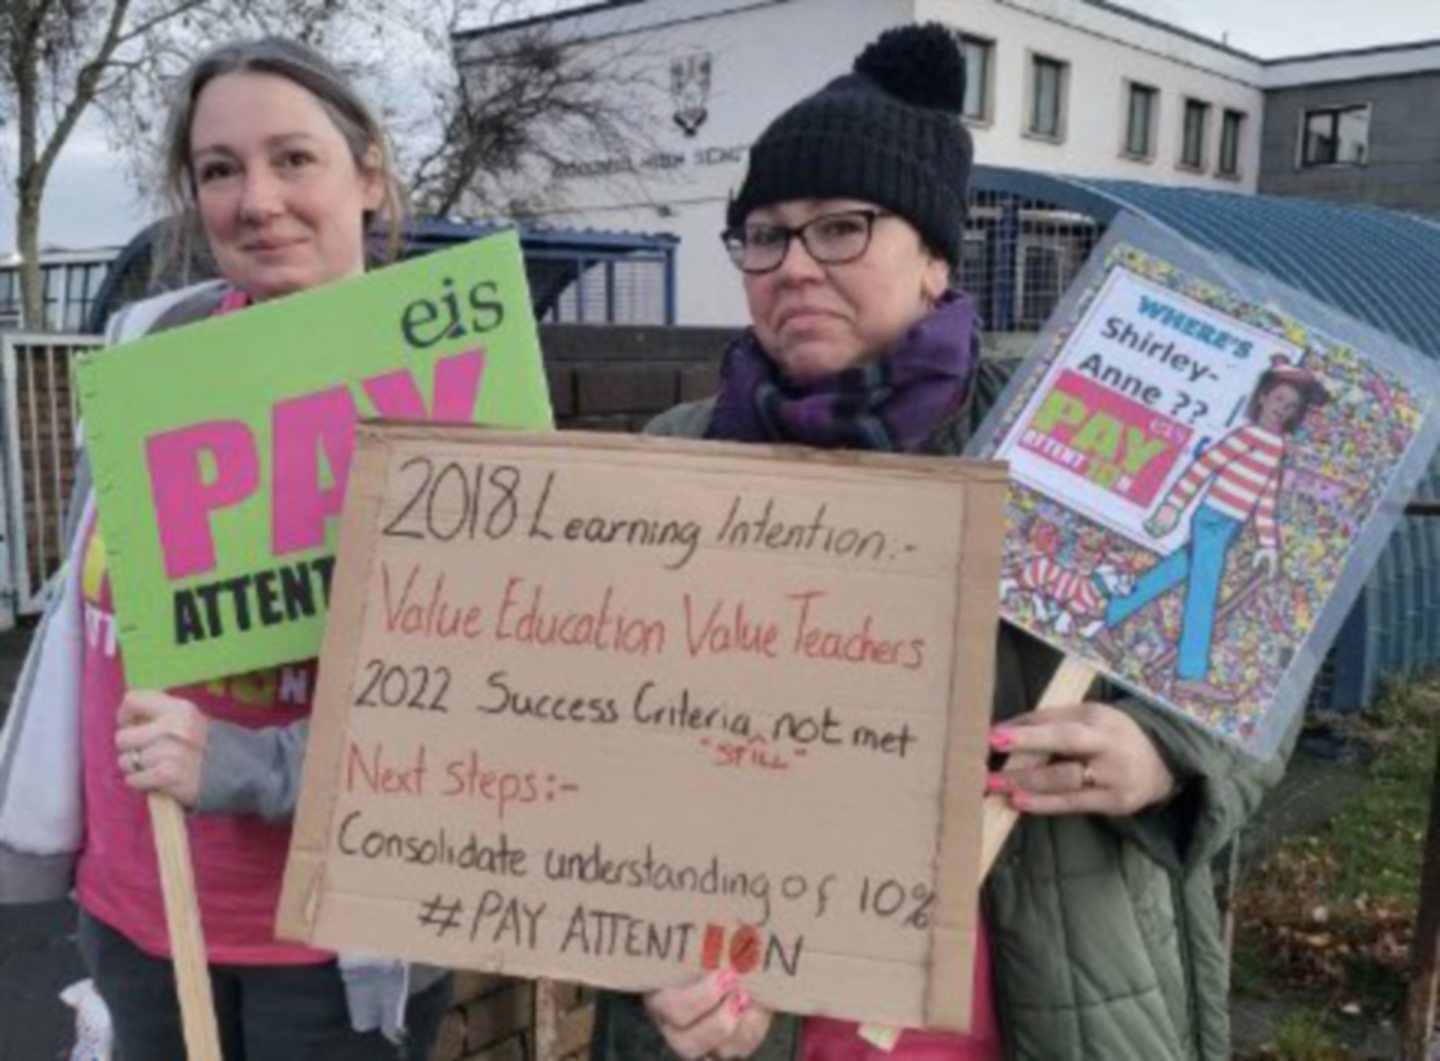 Teachers hold up signs about pay during strike.